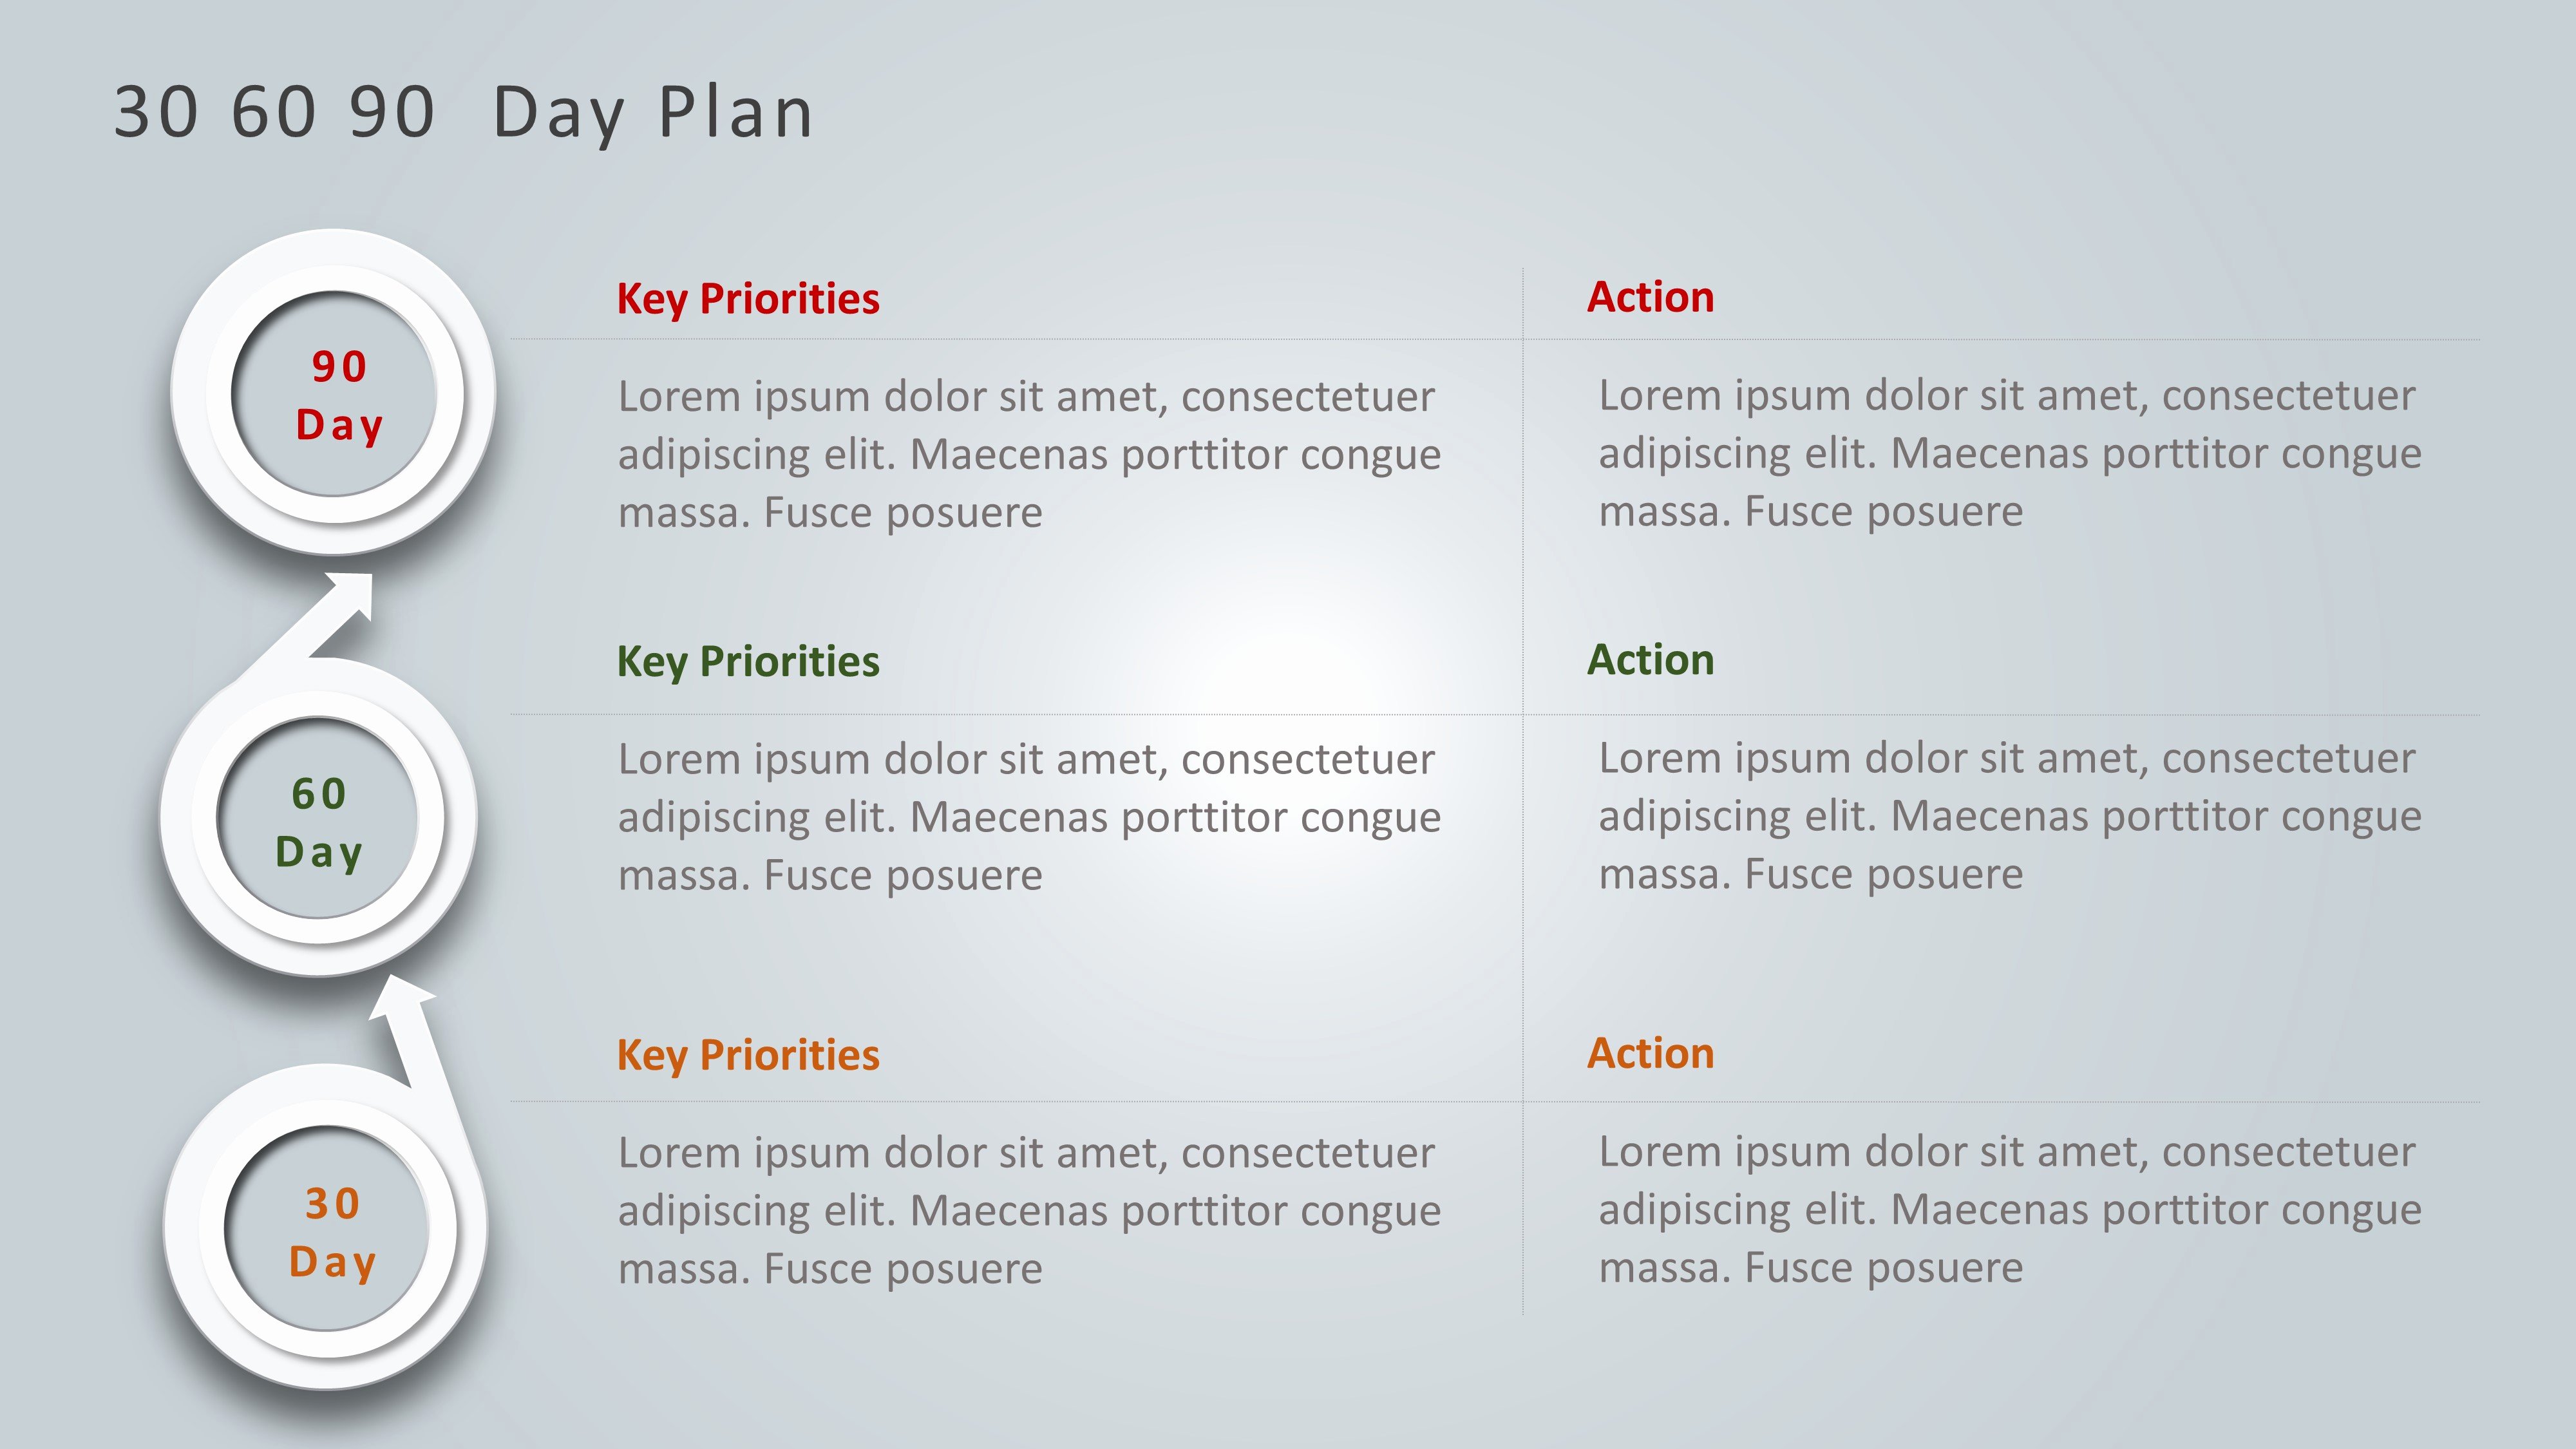 90 Day Plan Examples Best Of 30 60 90 Day Plan Powerpoint the north Star for A New Manager